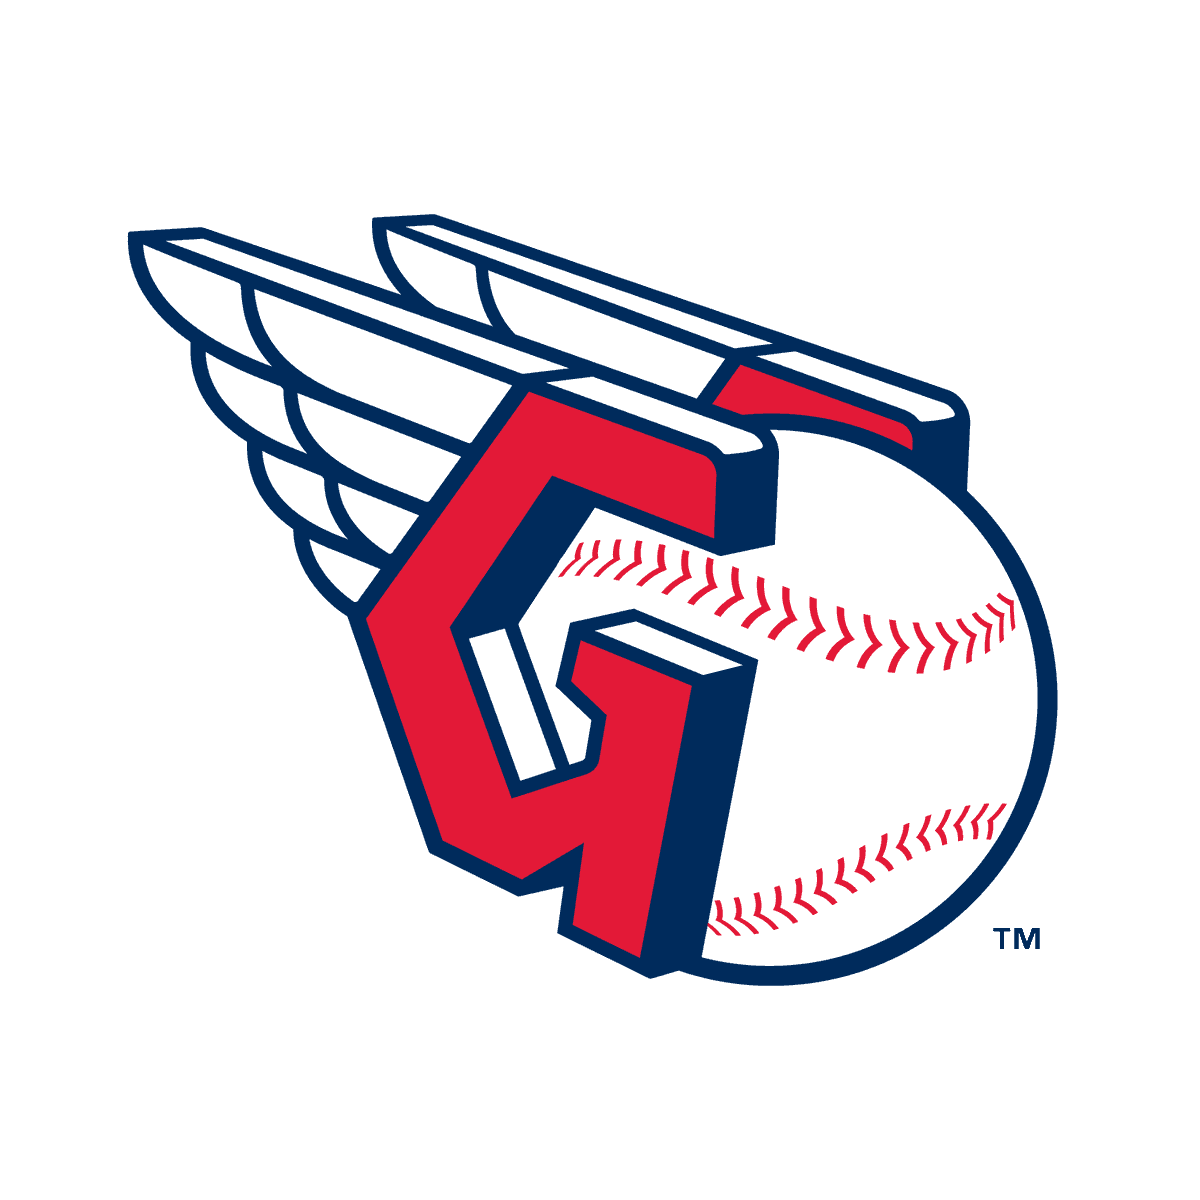 It's the Cleveland Guardians vs. the Boston Red Sox today at 7:10pm.  Pregame on WLEC begins at 6:35pm! Tune in then to catch the game. https://t.co/NTXJ0KWiVl